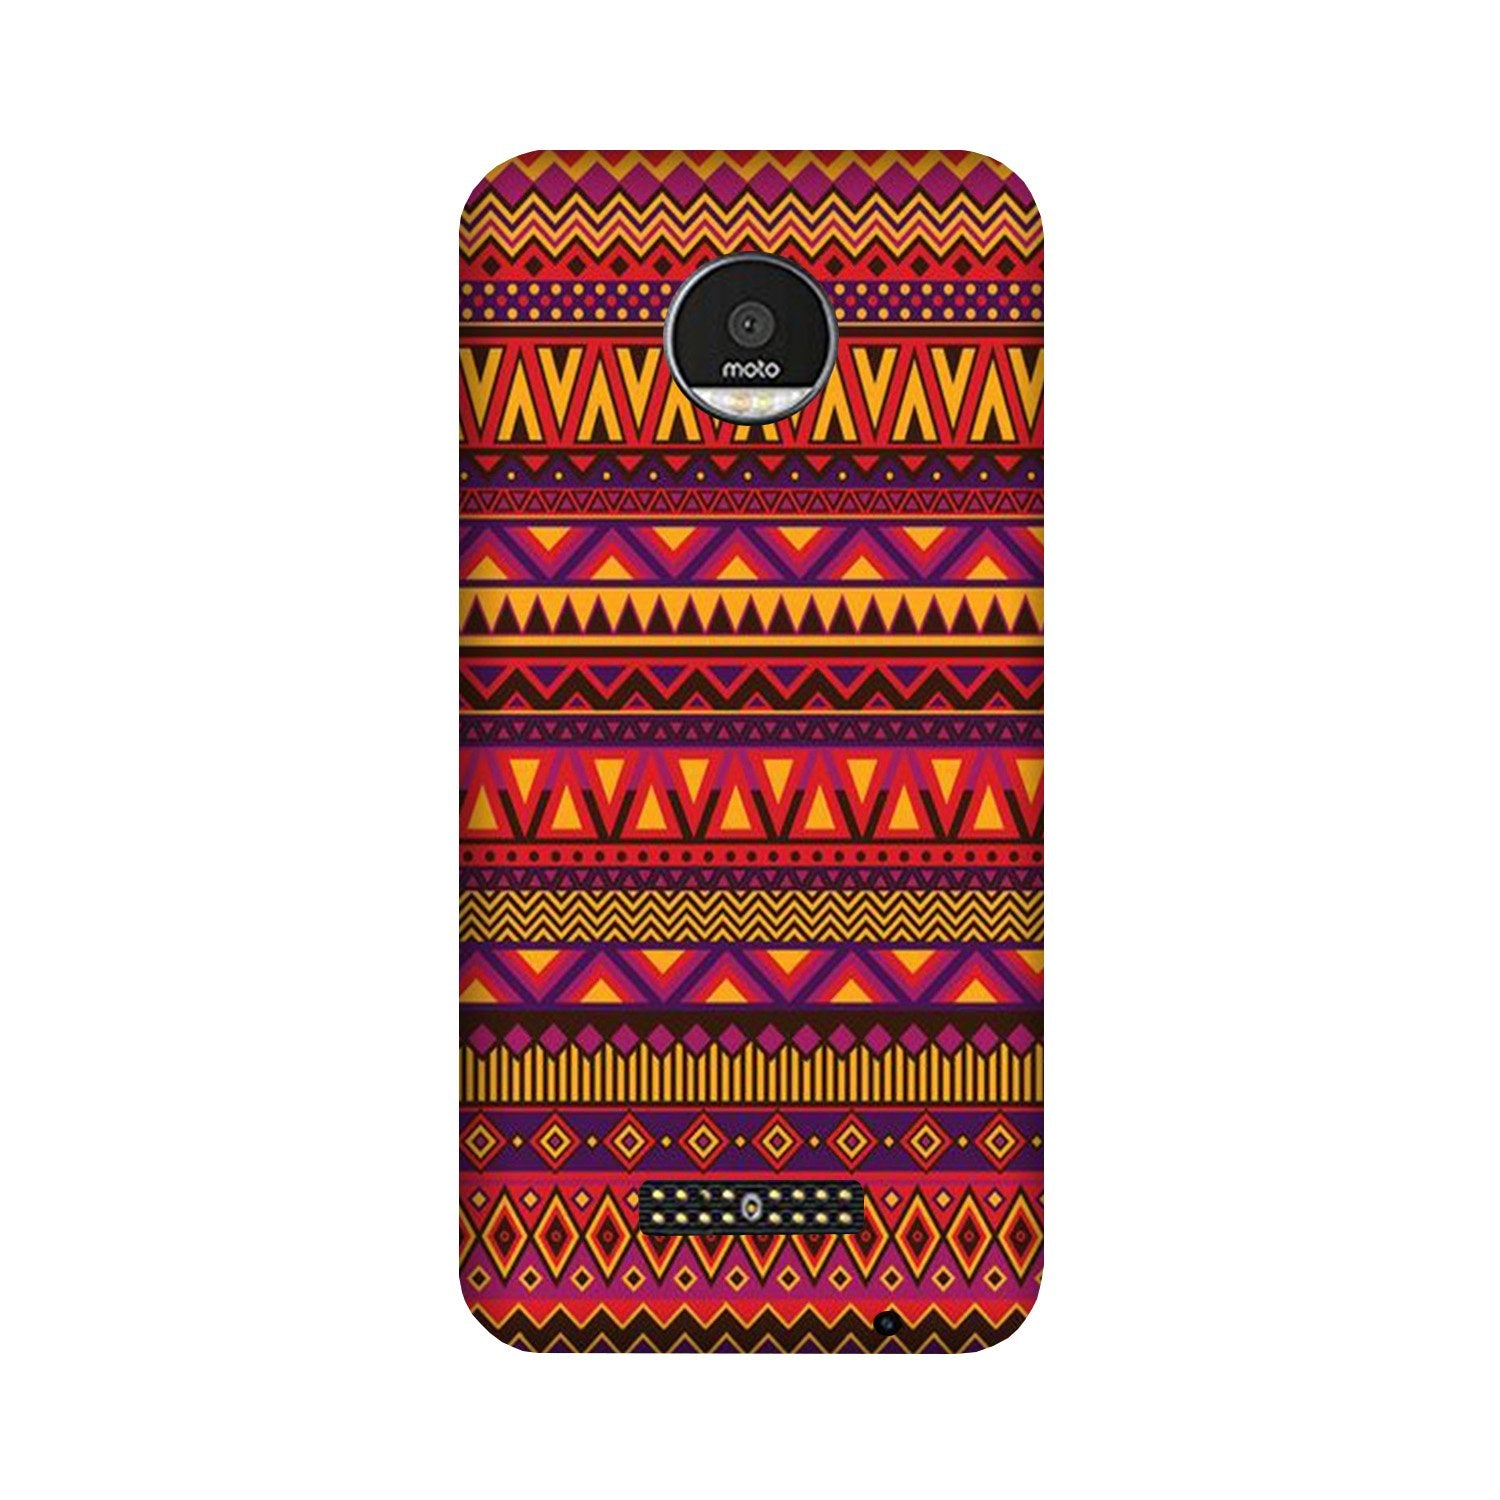 Zigzag line pattern2 Case for Moto Z2 Play